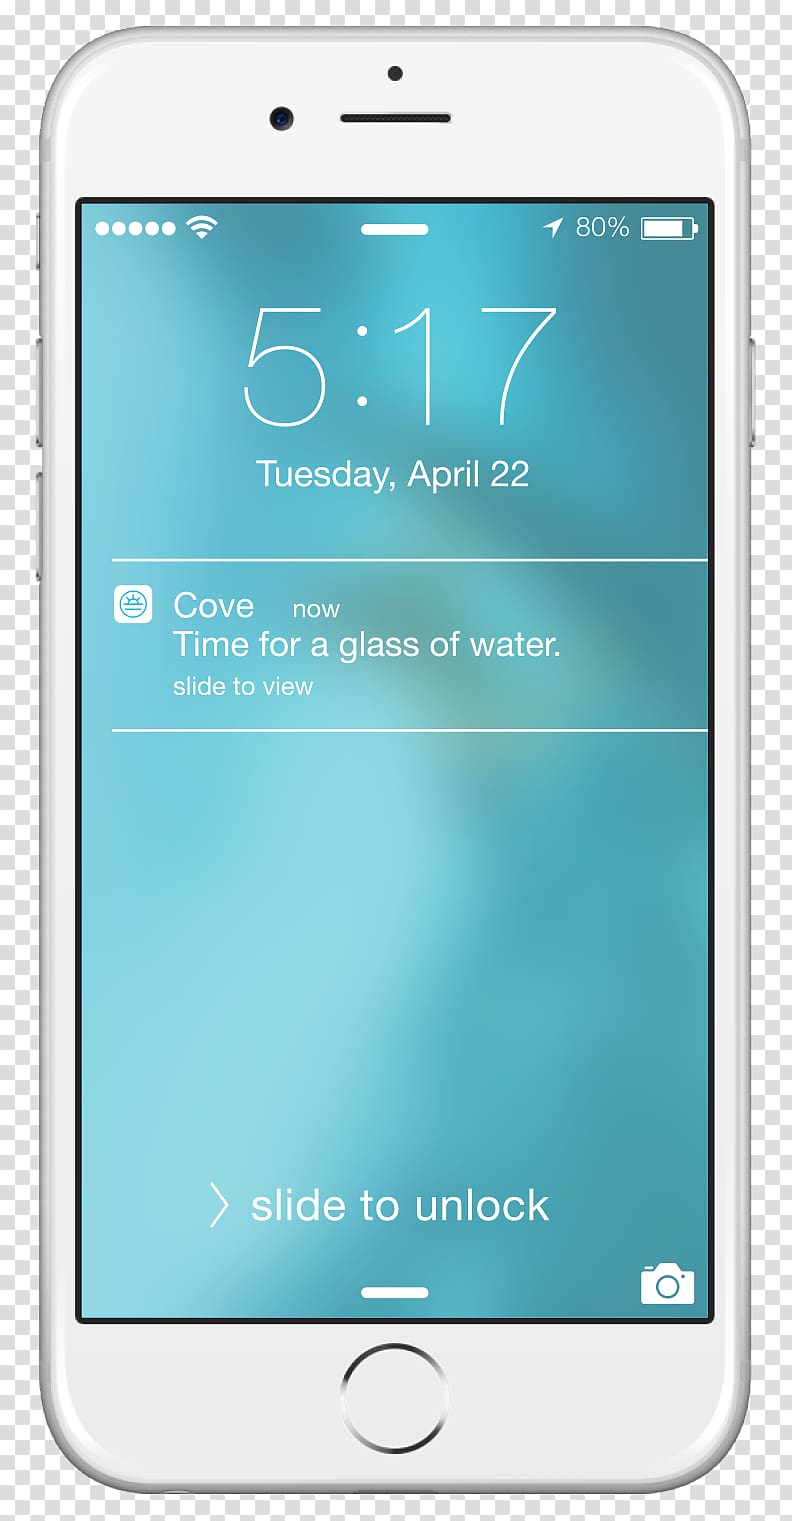 Feature phone Water Filter Reminders Drinking water Apple Push Notification Service, water transparent background PNG clipart